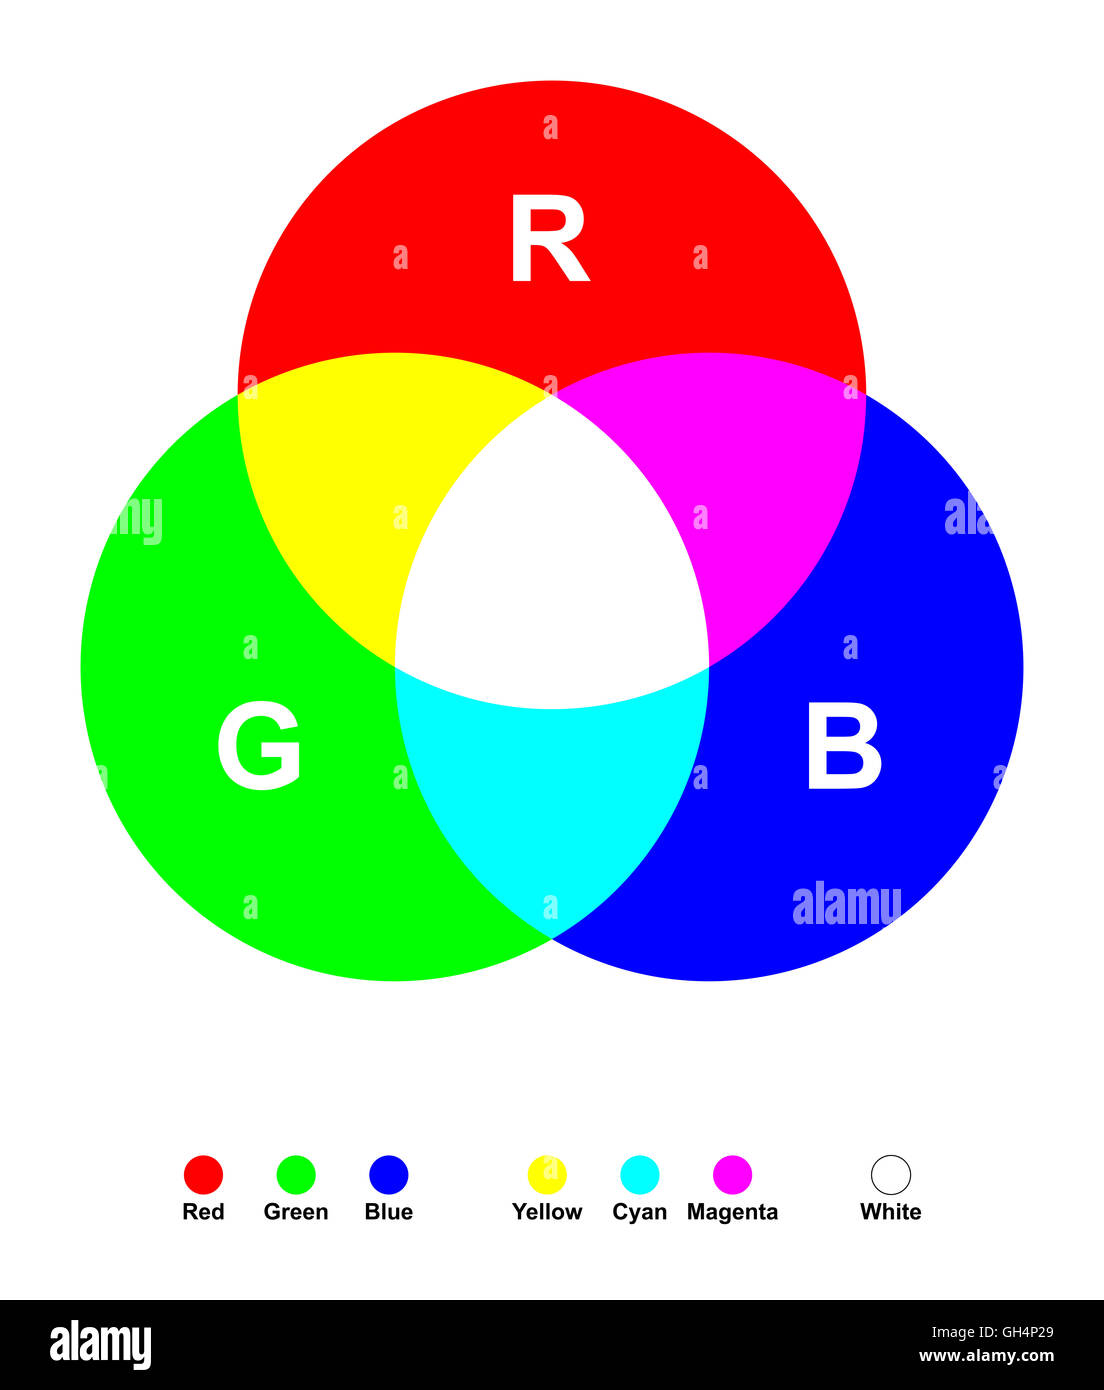 Additive color mixing. Three primary light colors red, green and blue mixed together yields white. Stock Photo